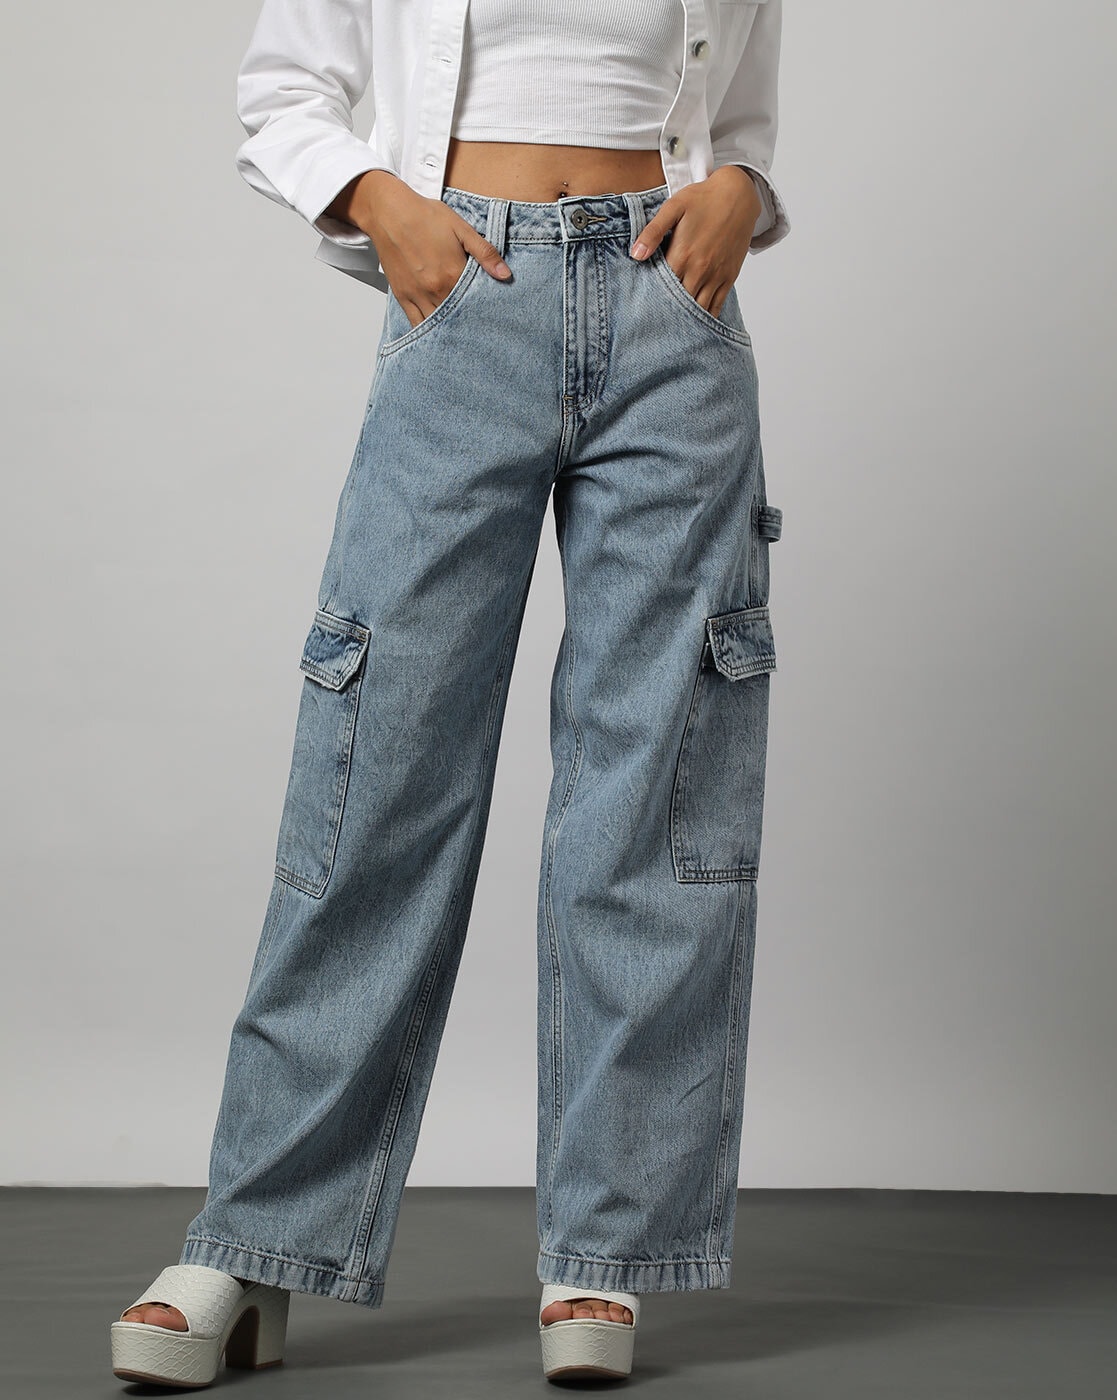 WOMEN LATEST CARGO TROUSERS BY SKG | SOLID HIGH-RISE CARGO JEANS | 6 POCKET  WIDE LEG DENIMS | 80'S ROCKER-CHIC INSPIRED CARGO PANTS | SIT ABOVE |  NON-STRETCH FIT WITH A WIDE